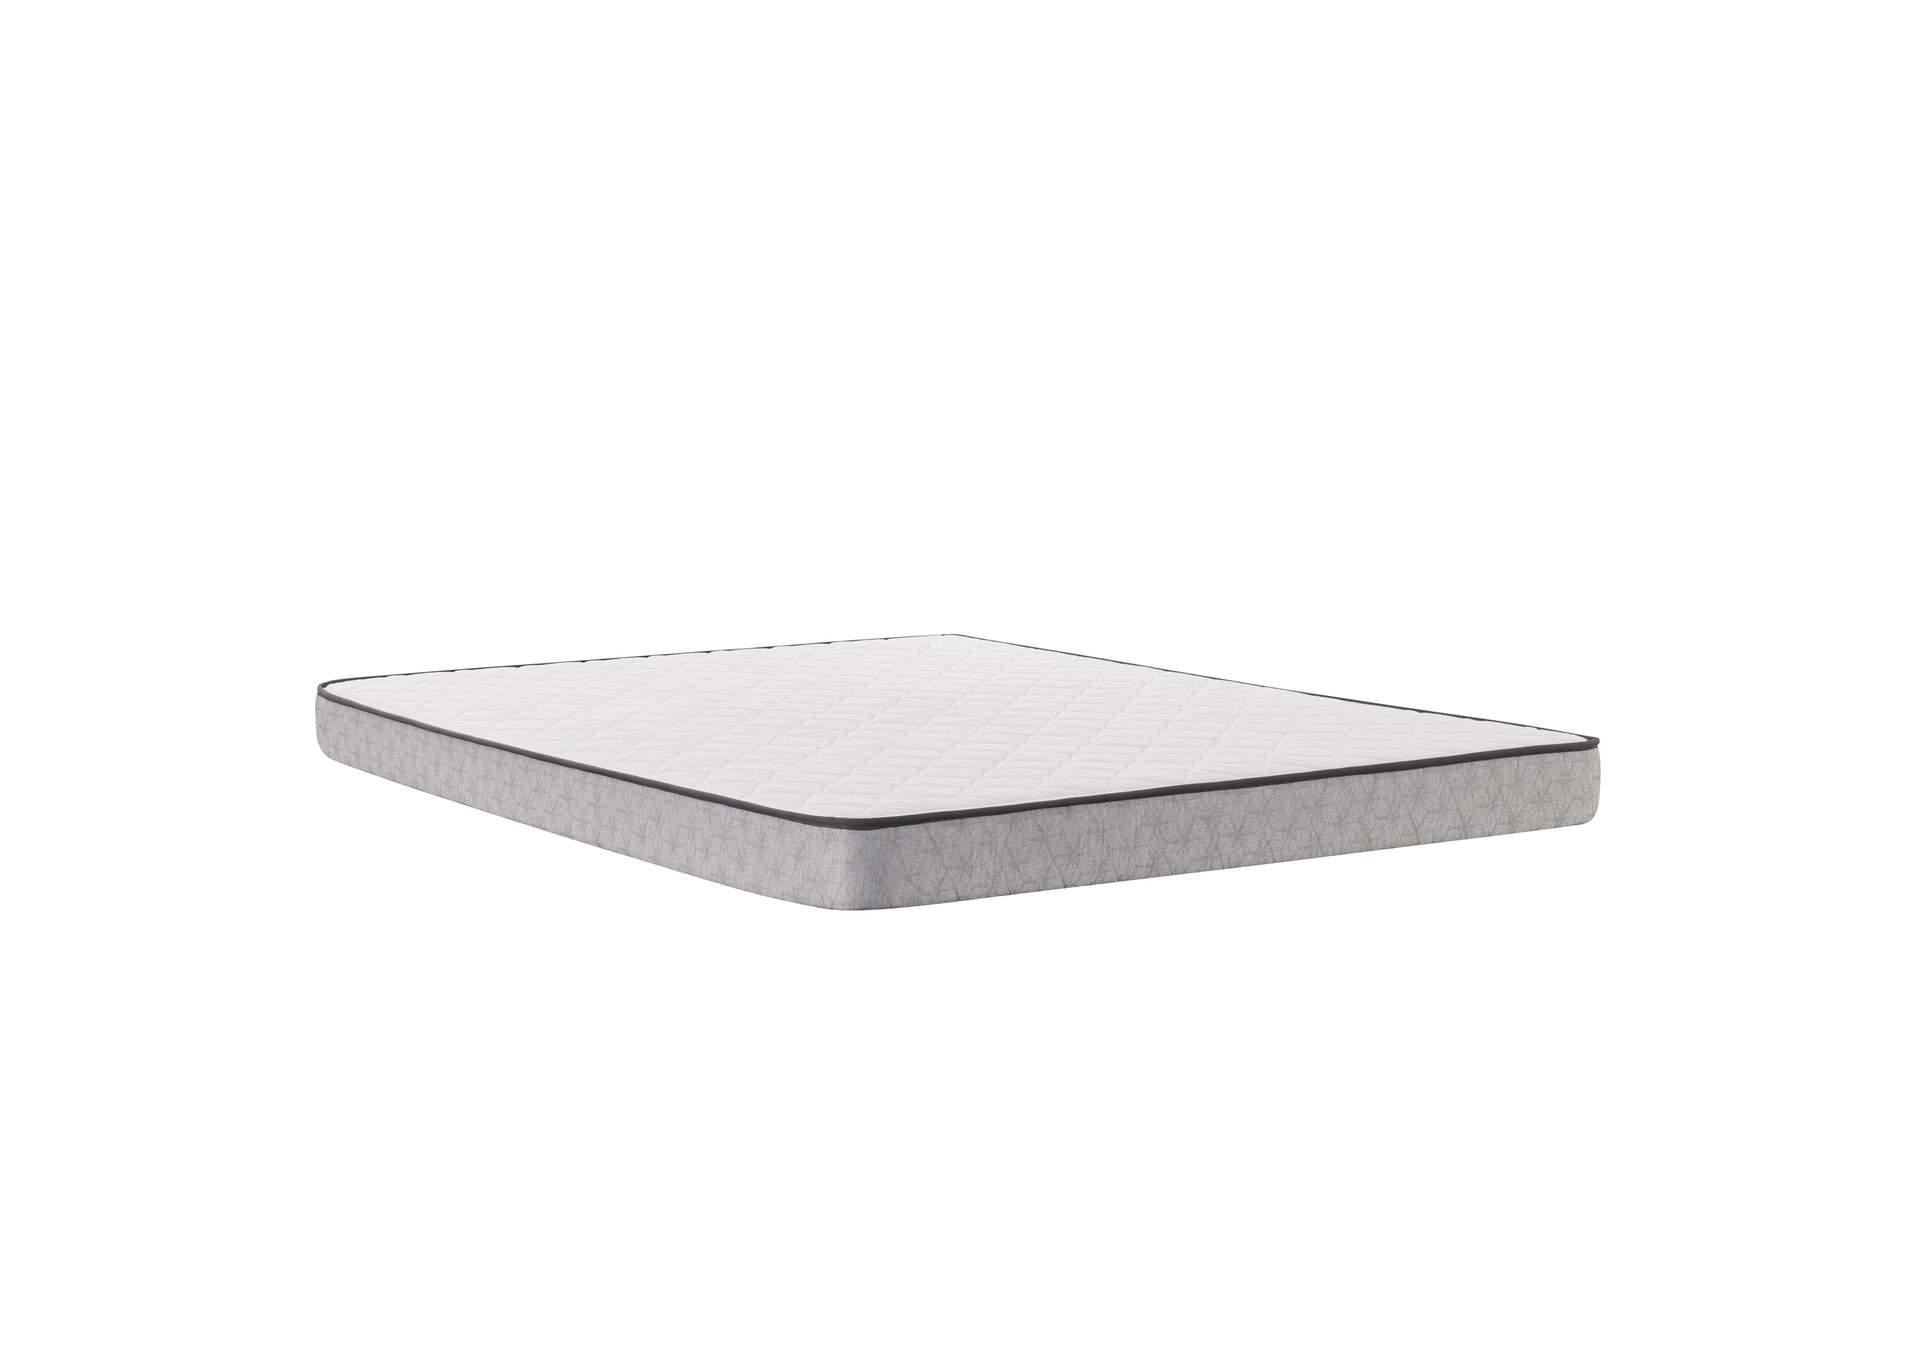 Spruce Tight Top Queen Mattress,Sealy